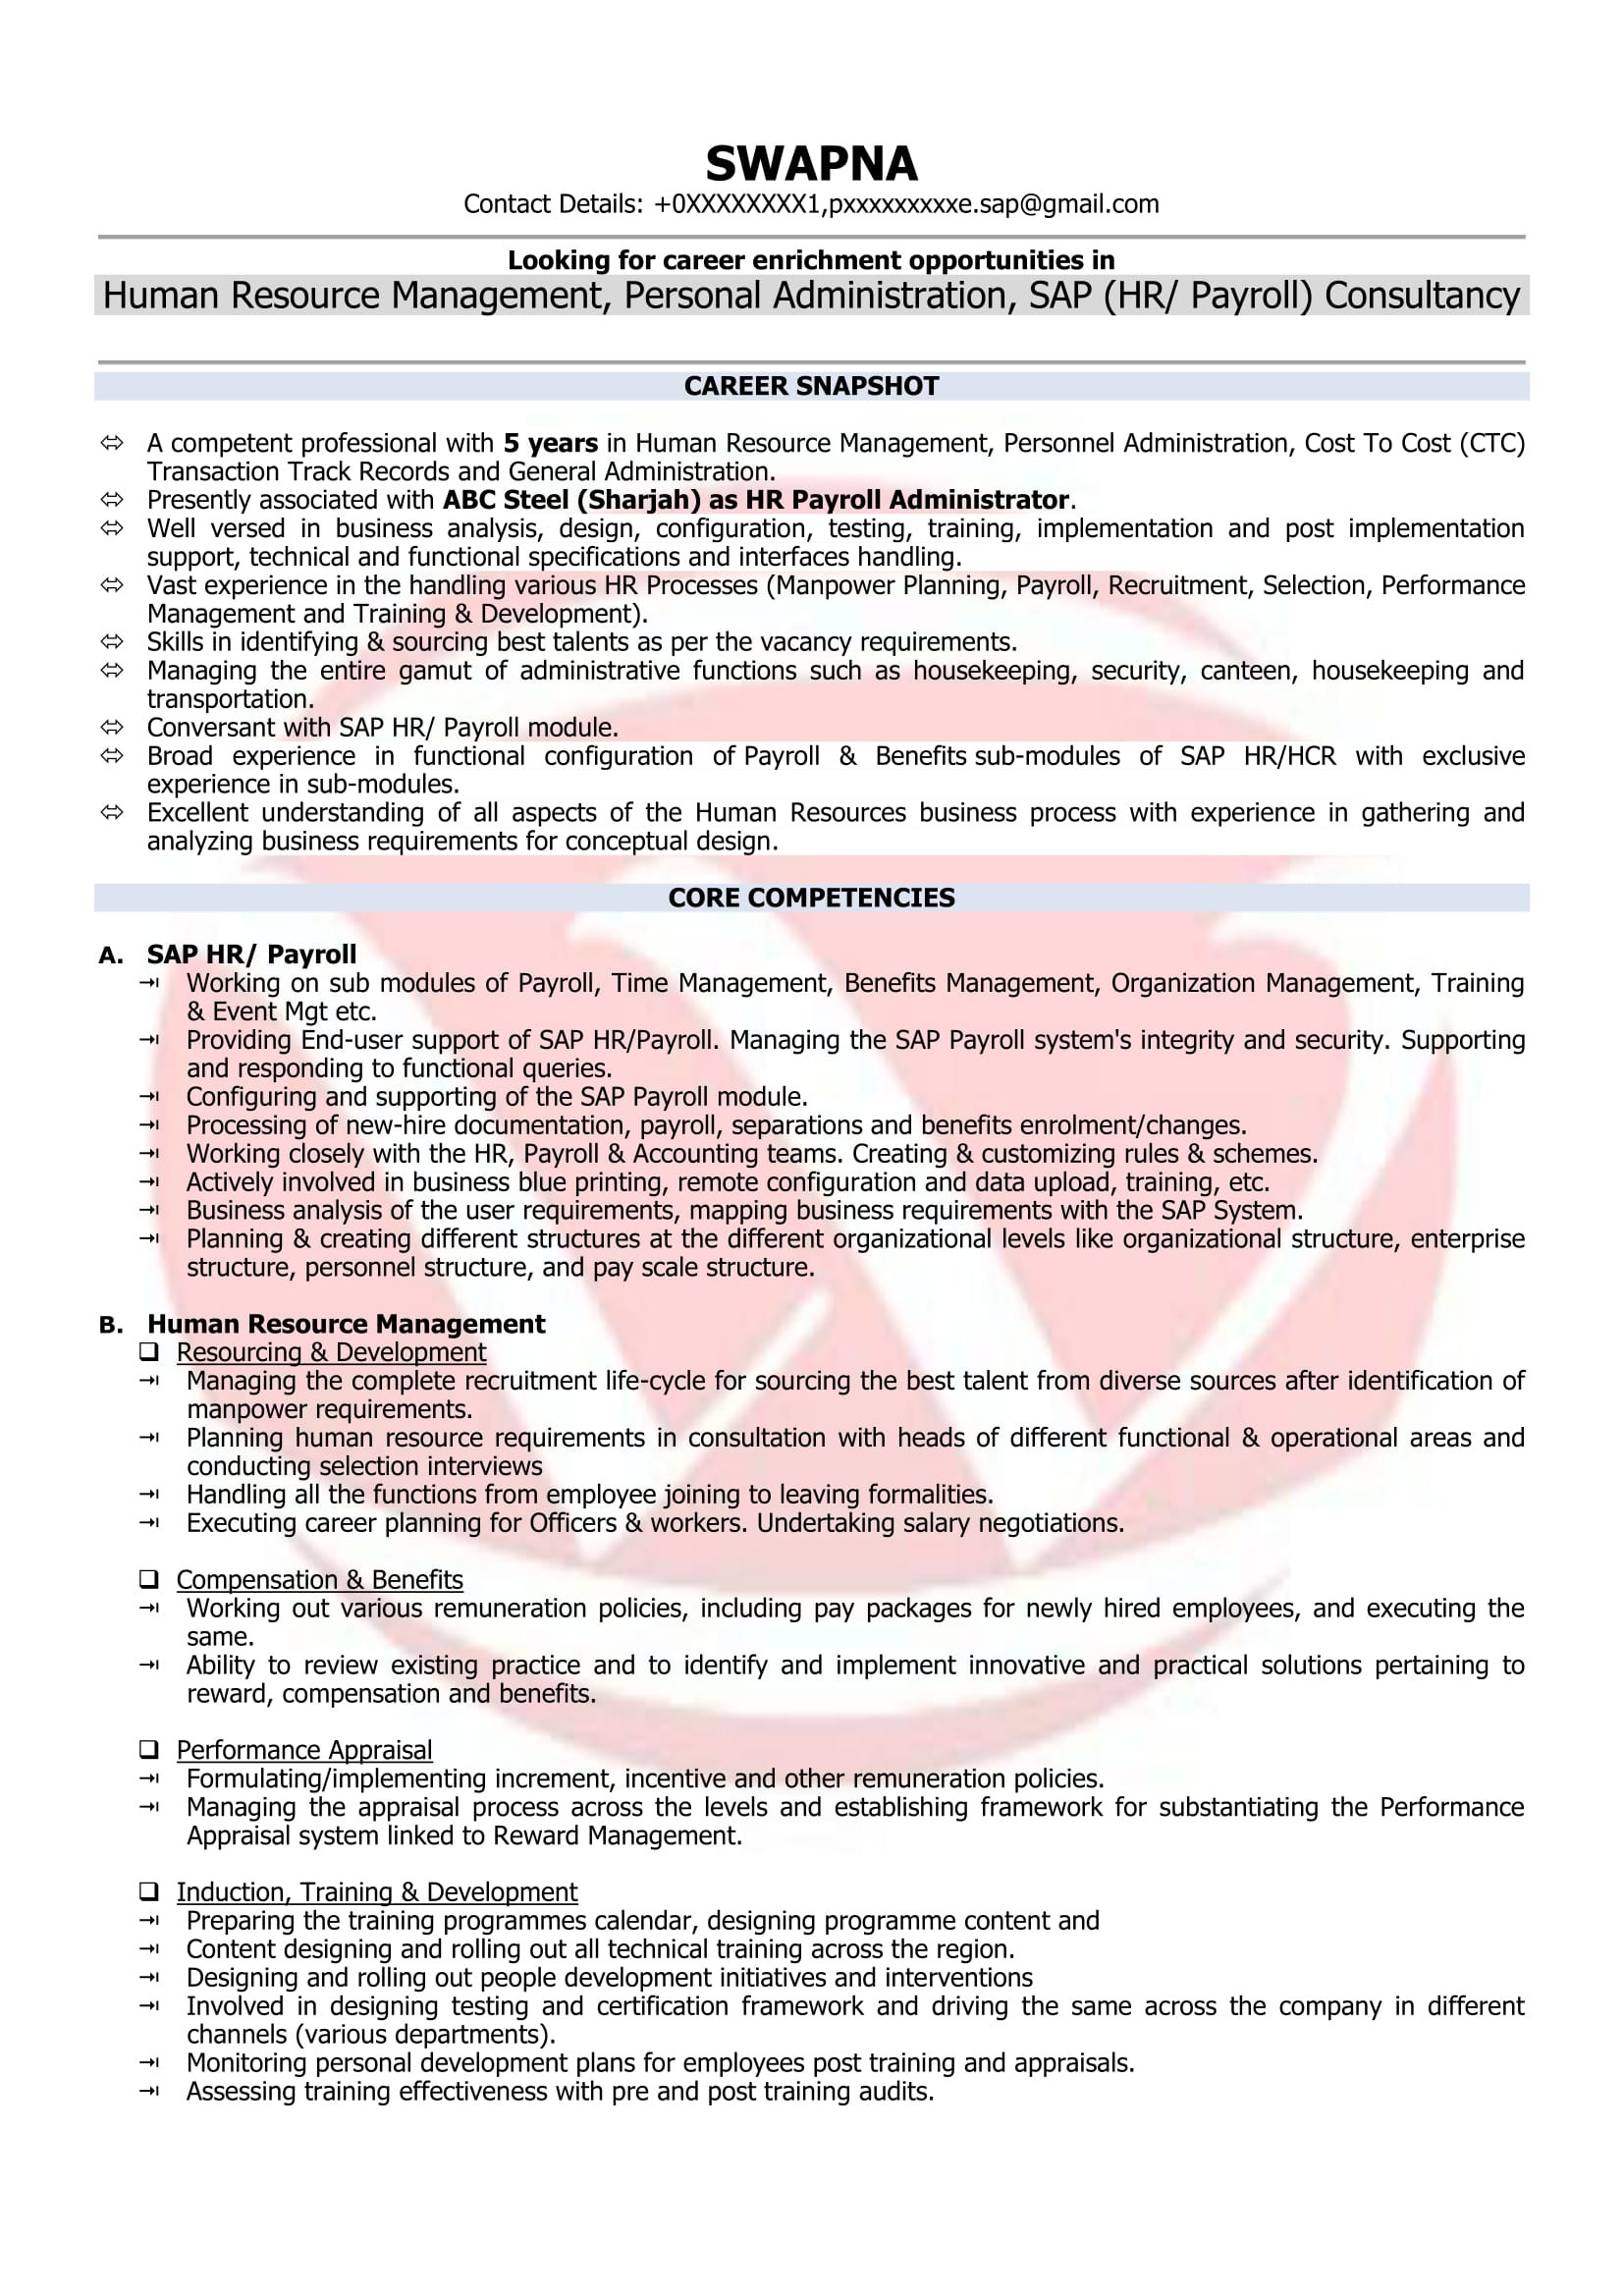 Hr Resume Sample for 1 Year Experience Hr Executive Sample Resumes, Download Resume format Templates!